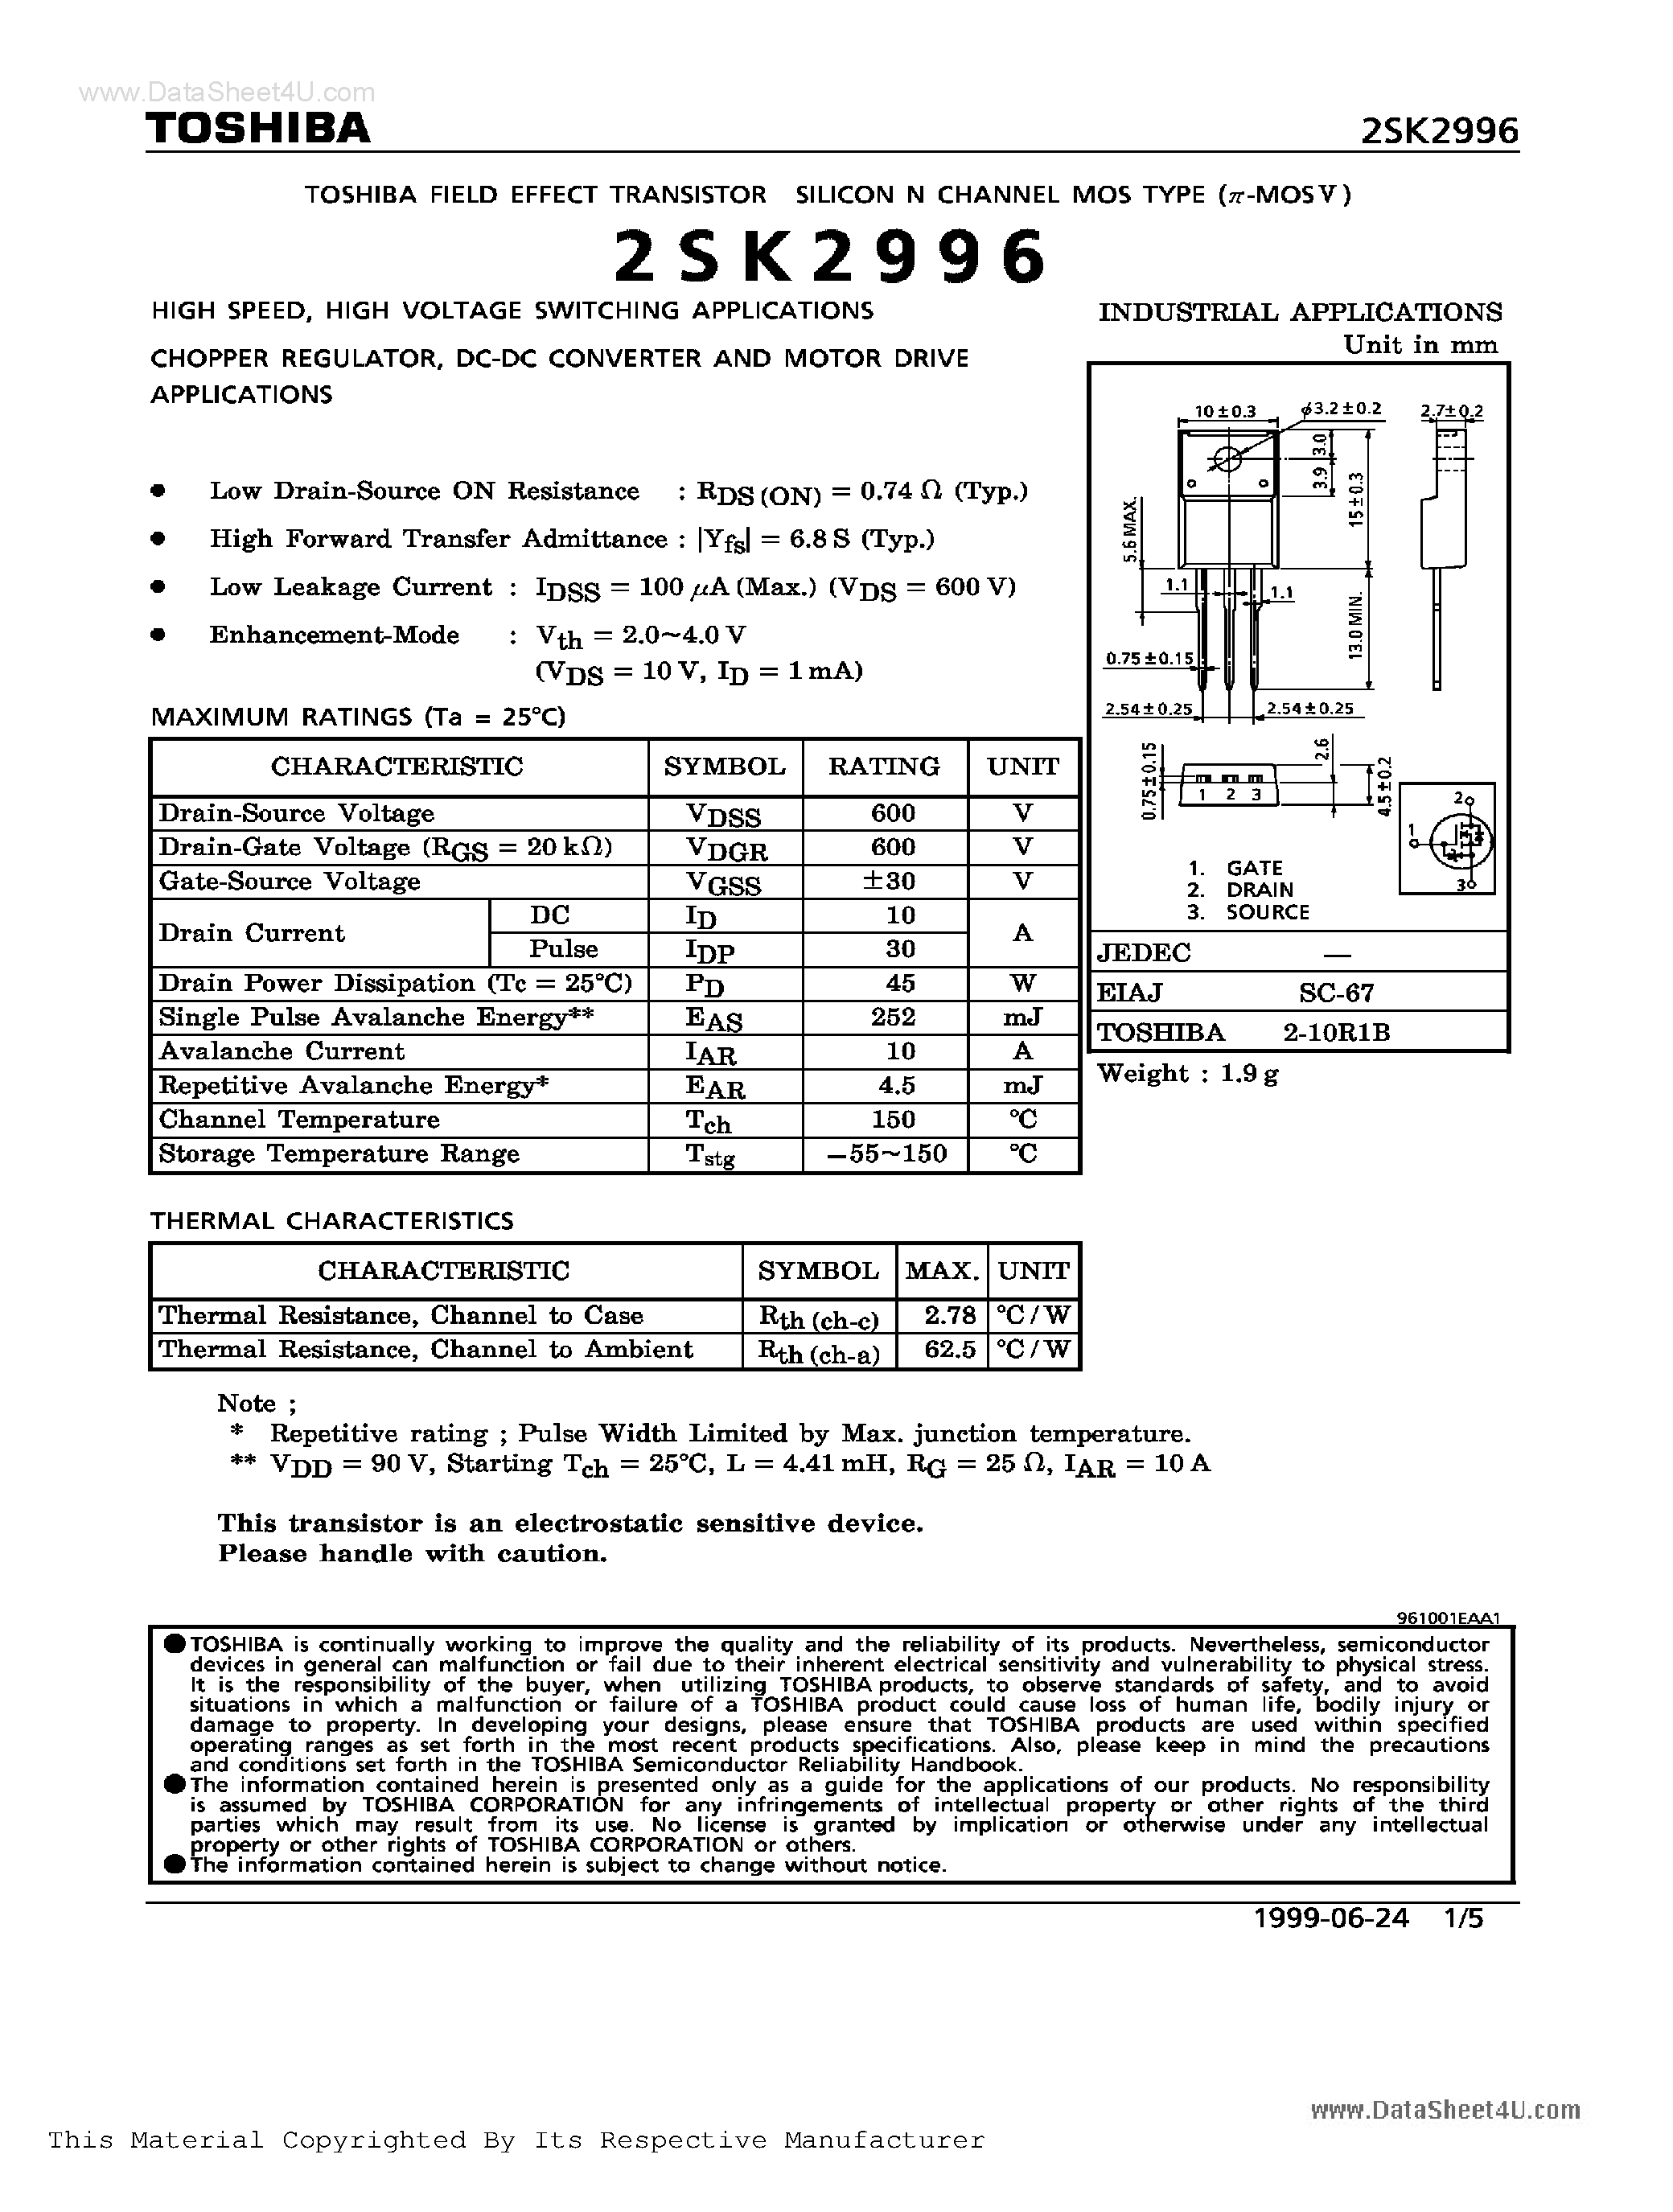 Datasheet K2996 - Search -----> 2SK2996 page 1